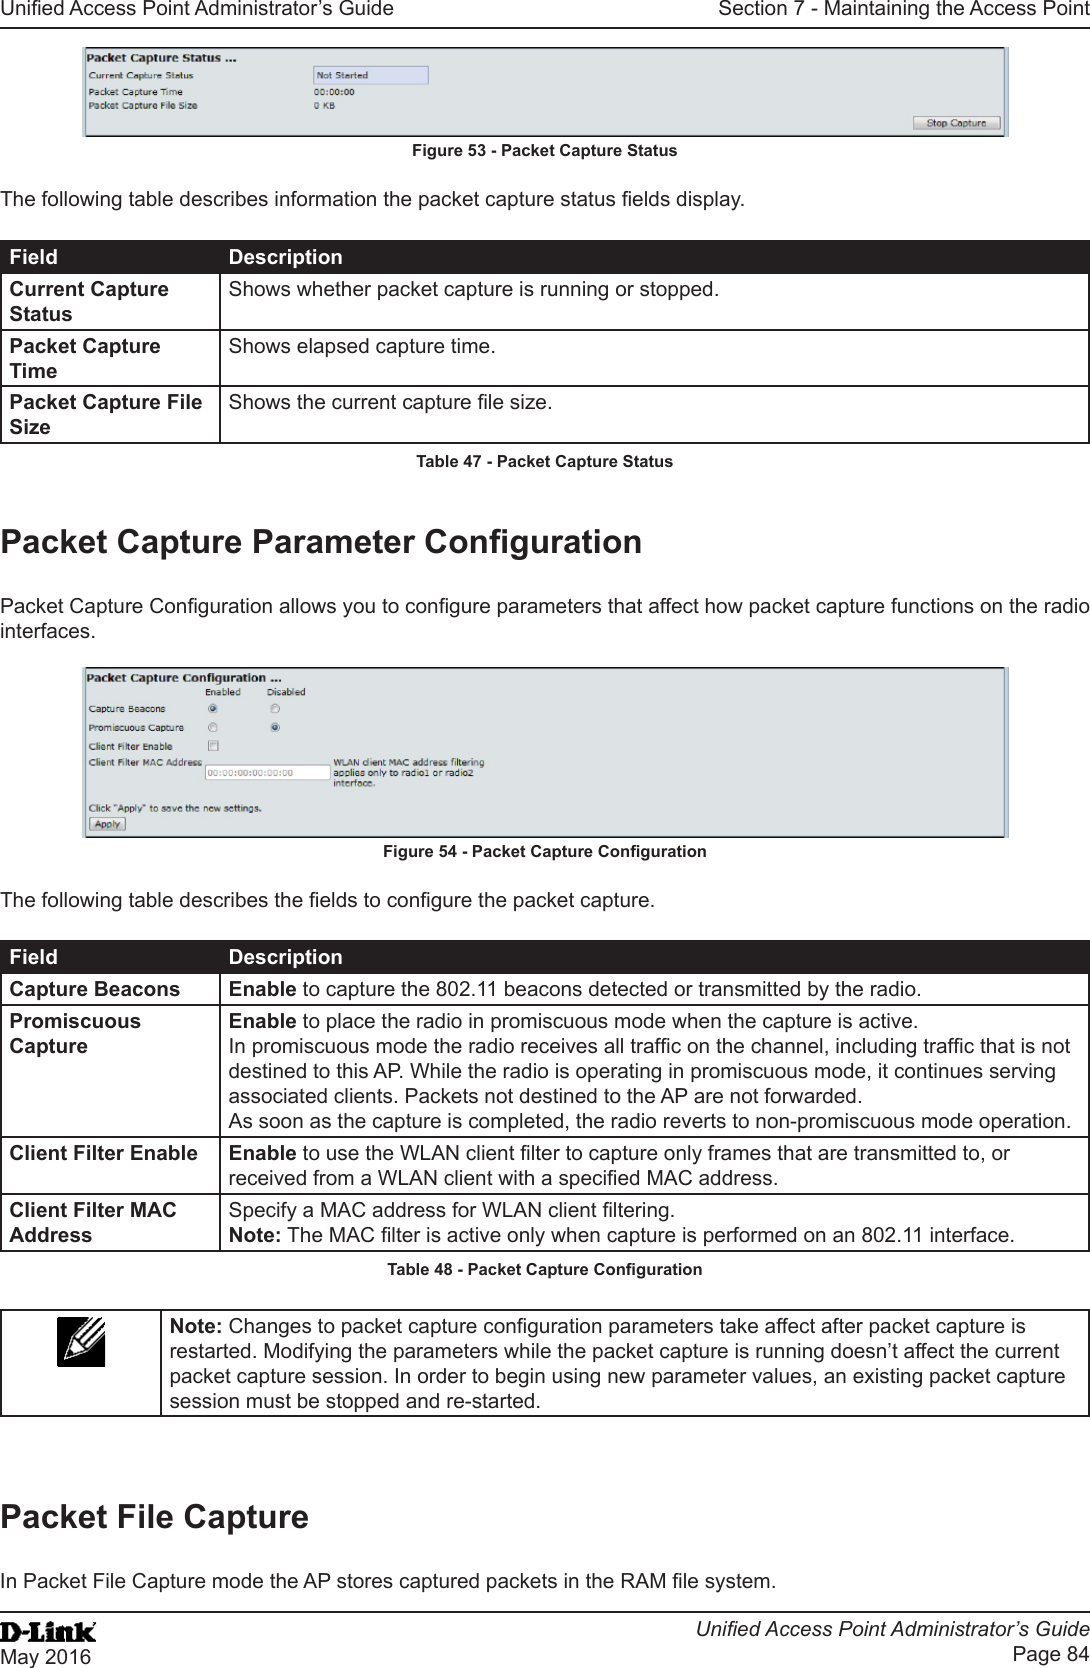 Unied Access Point Administrator’s GuideUnied Access Point Administrator’s GuidePage 84May 2016Section 7 - Maintaining the Access PointFigure 53 - Packet Capture StatusThe following table describes information the packet capture status elds display.Field DescriptionCurrent Capture StatusShows whether packet capture is running or stopped.Packet Capture TimeShows elapsed capture time.Packet Capture File SizeShows the current capture le size.Table 47 - Packet Capture StatusPacket Capture Parameter CongurationPacket Capture Conguration allows you to congure parameters that affect how packet capture functions on the radio interfaces.Figure 54 - Packet Capture CongurationThe following table describes the elds to congure the packet capture.Field DescriptionCapture Beacons Enable to capture the 802.11 beacons detected or transmitted by the radio.Promiscuous CaptureEnable to place the radio in promiscuous mode when the capture is active. In promiscuous mode the radio receives all trafc on the channel, including trafc that is not destined to this AP. While the radio is operating in promiscuous mode, it continues serving associated clients. Packets not destined to the AP are not forwarded. As soon as the capture is completed, the radio reverts to non-promiscuous mode operation.Client Filter Enable Enable to use the WLAN client lter to capture only frames that are transmitted to, or received from a WLAN client with a specied MAC address.Client Filter MAC AddressSpecify a MAC address for WLAN client ltering.Note: The MAC lter is active only when capture is performed on an 802.11 interface.Table 48 - Packet Capture CongurationNote: Changes to packet capture conguration parameters take affect after packet capture is restarted. Modifying the parameters while the packet capture is running doesn’t affect the current packet capture session. In order to begin using new parameter values, an existing packet capture session must be stopped and re-started.Packet File CaptureIn Packet File Capture mode the AP stores captured packets in the RAM le system.